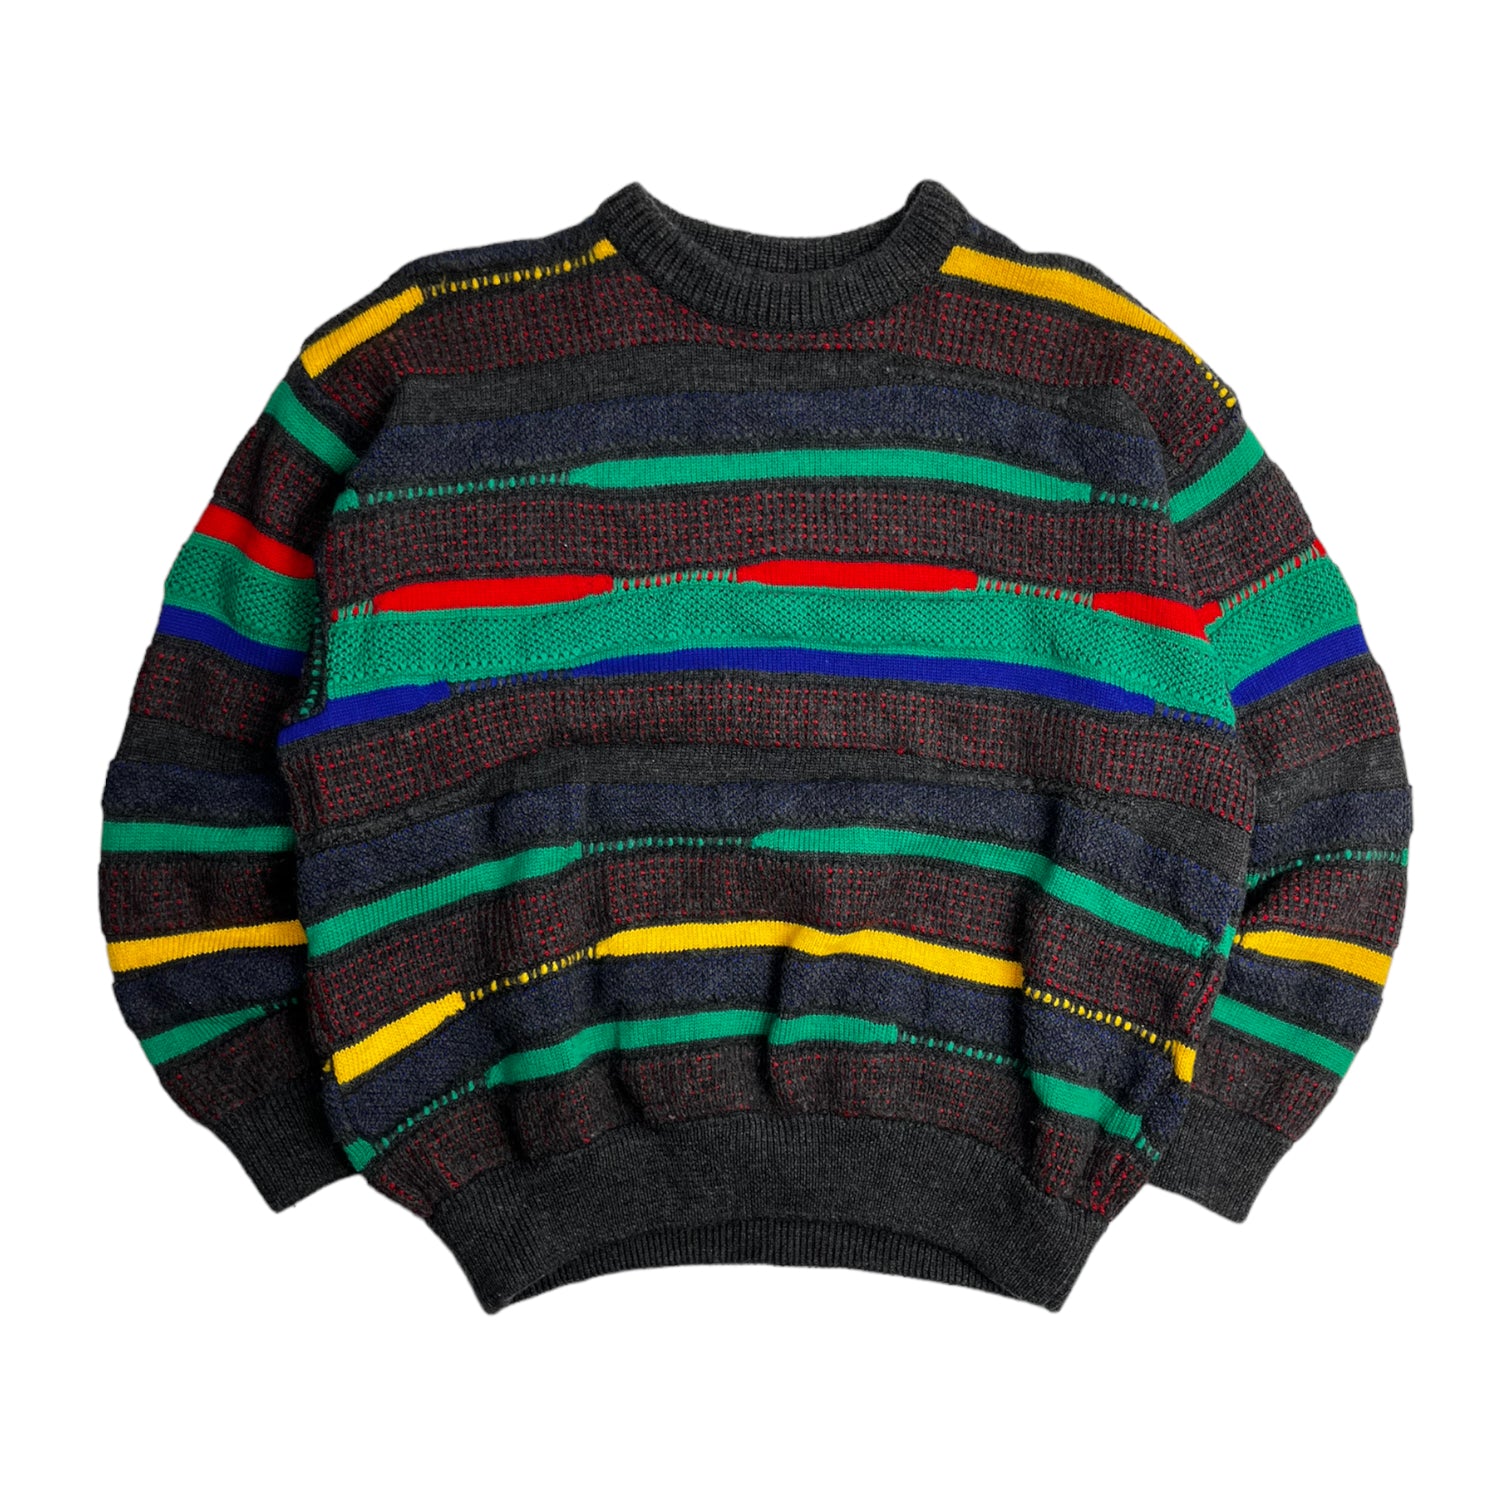 Vintage Coogi Lined Colour Knit Sweater